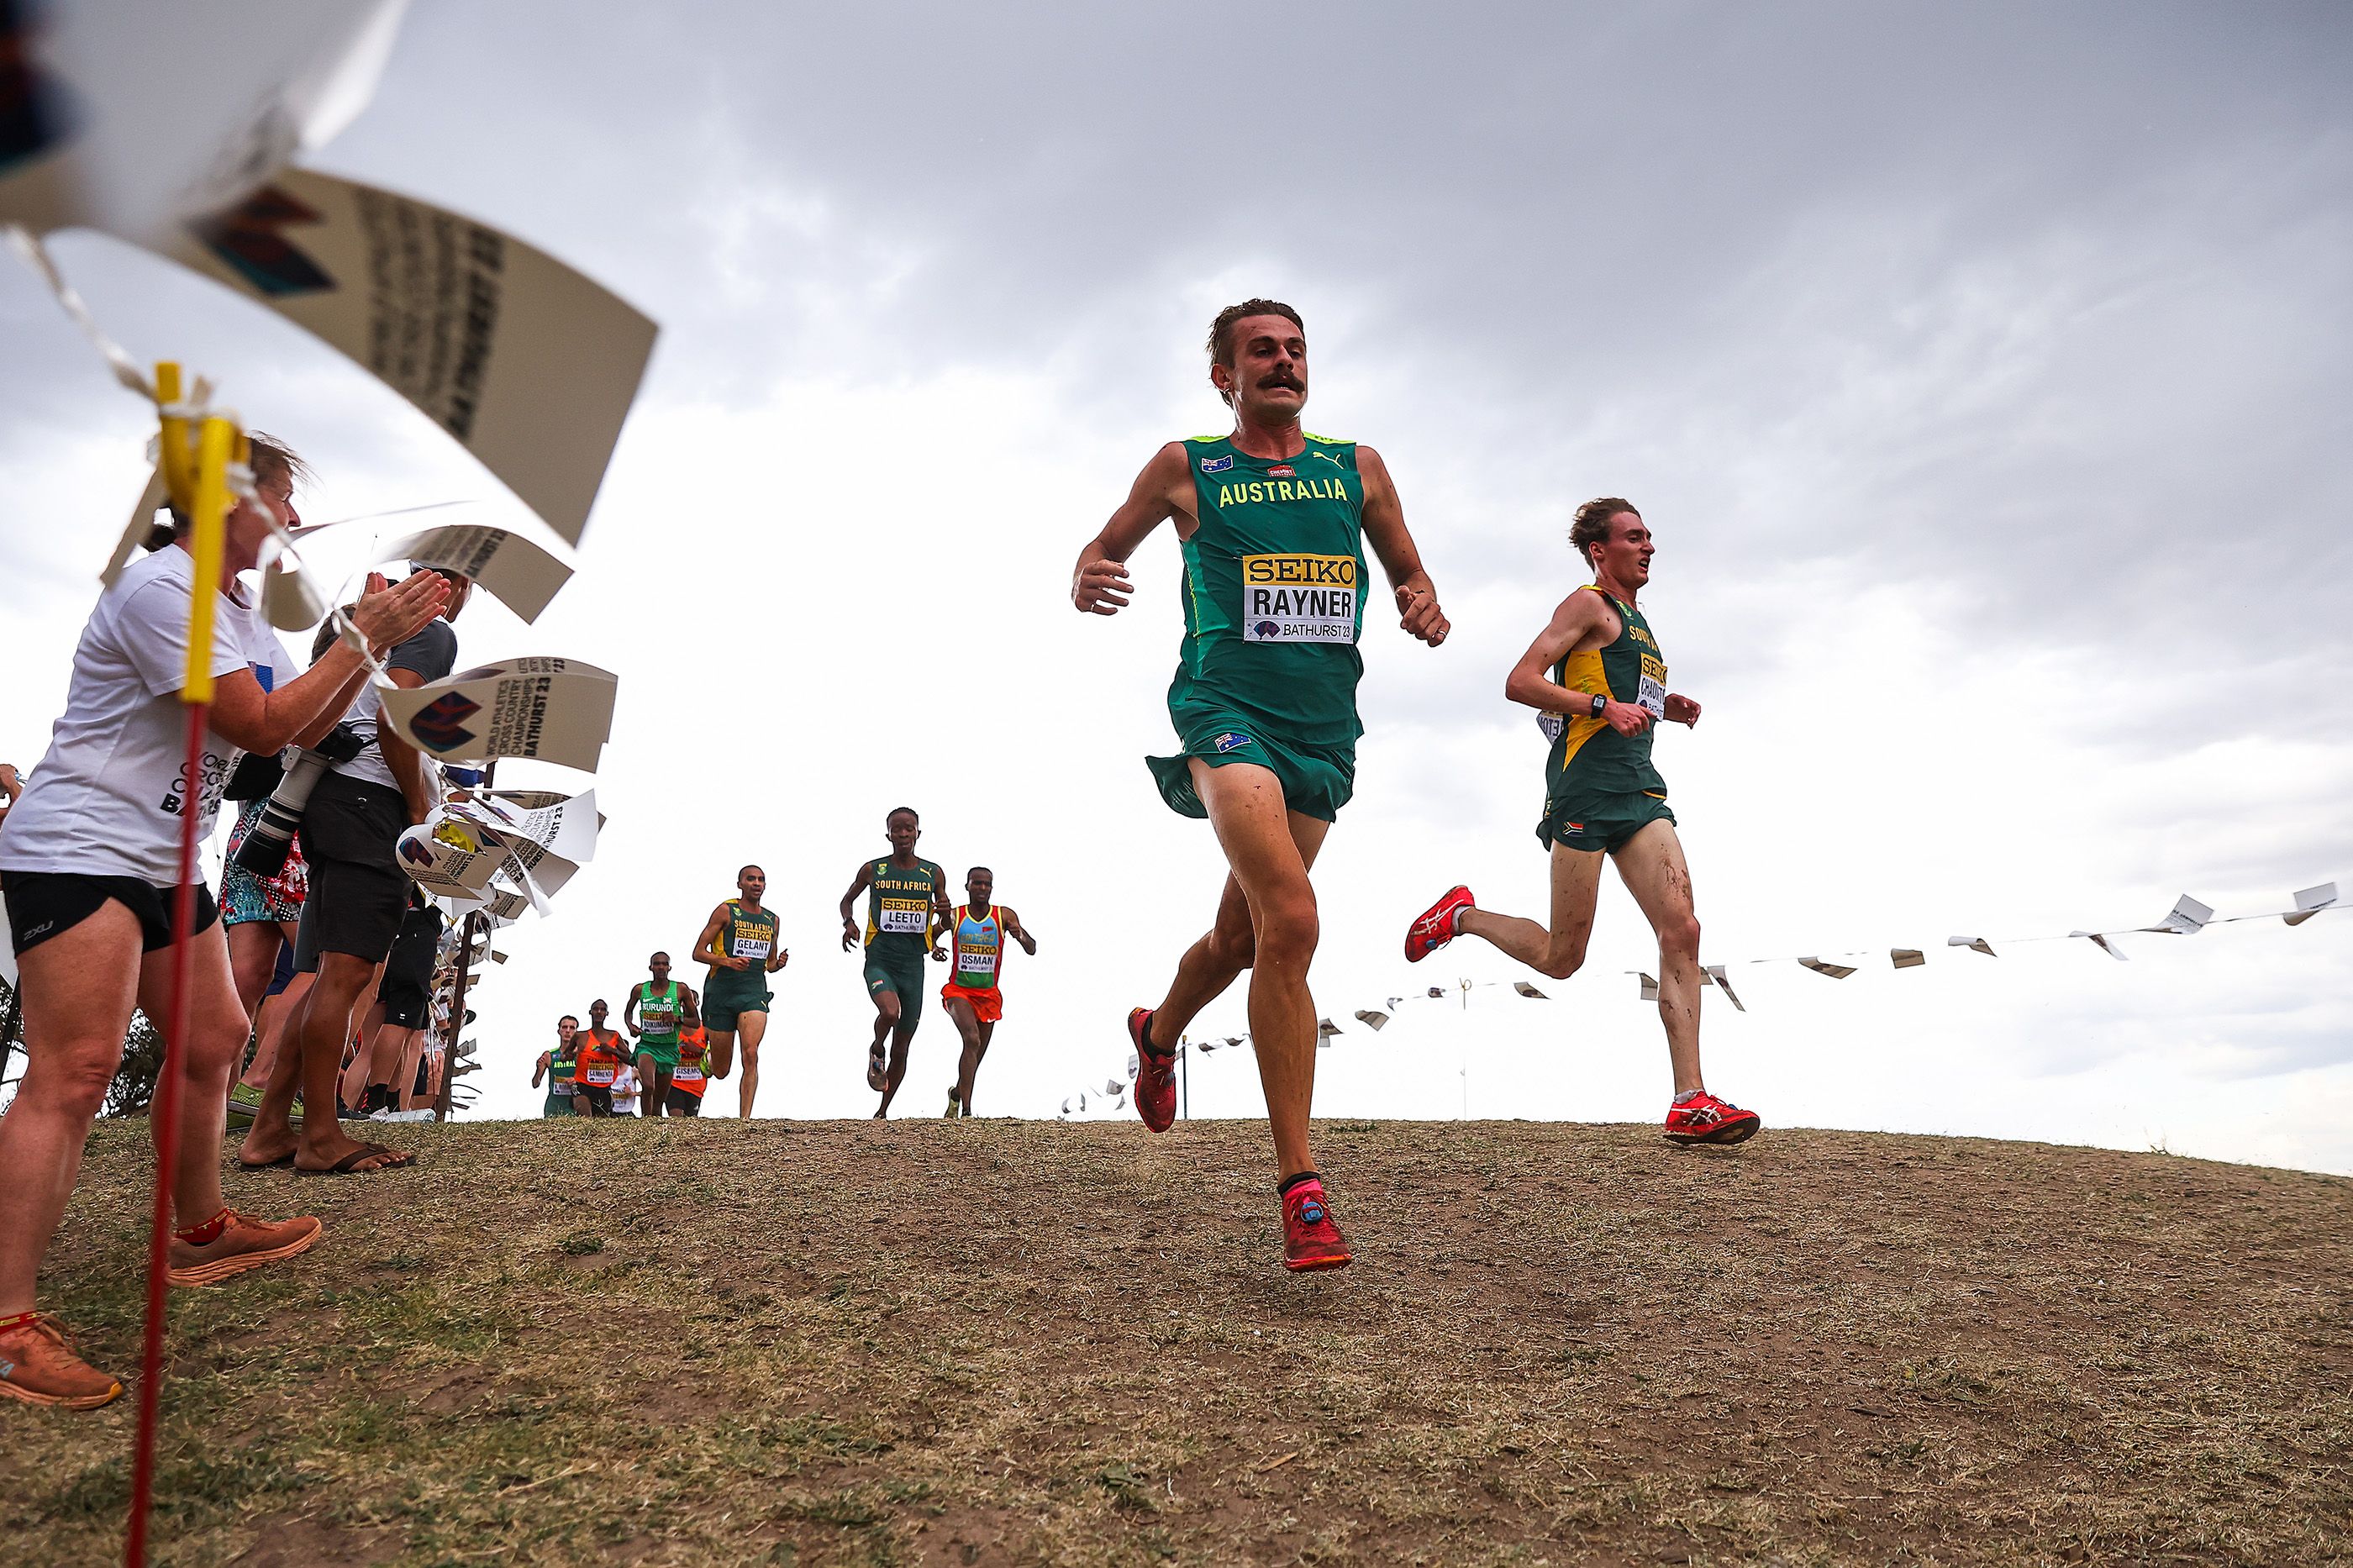 Athletes in action at the World Cross Country Championships